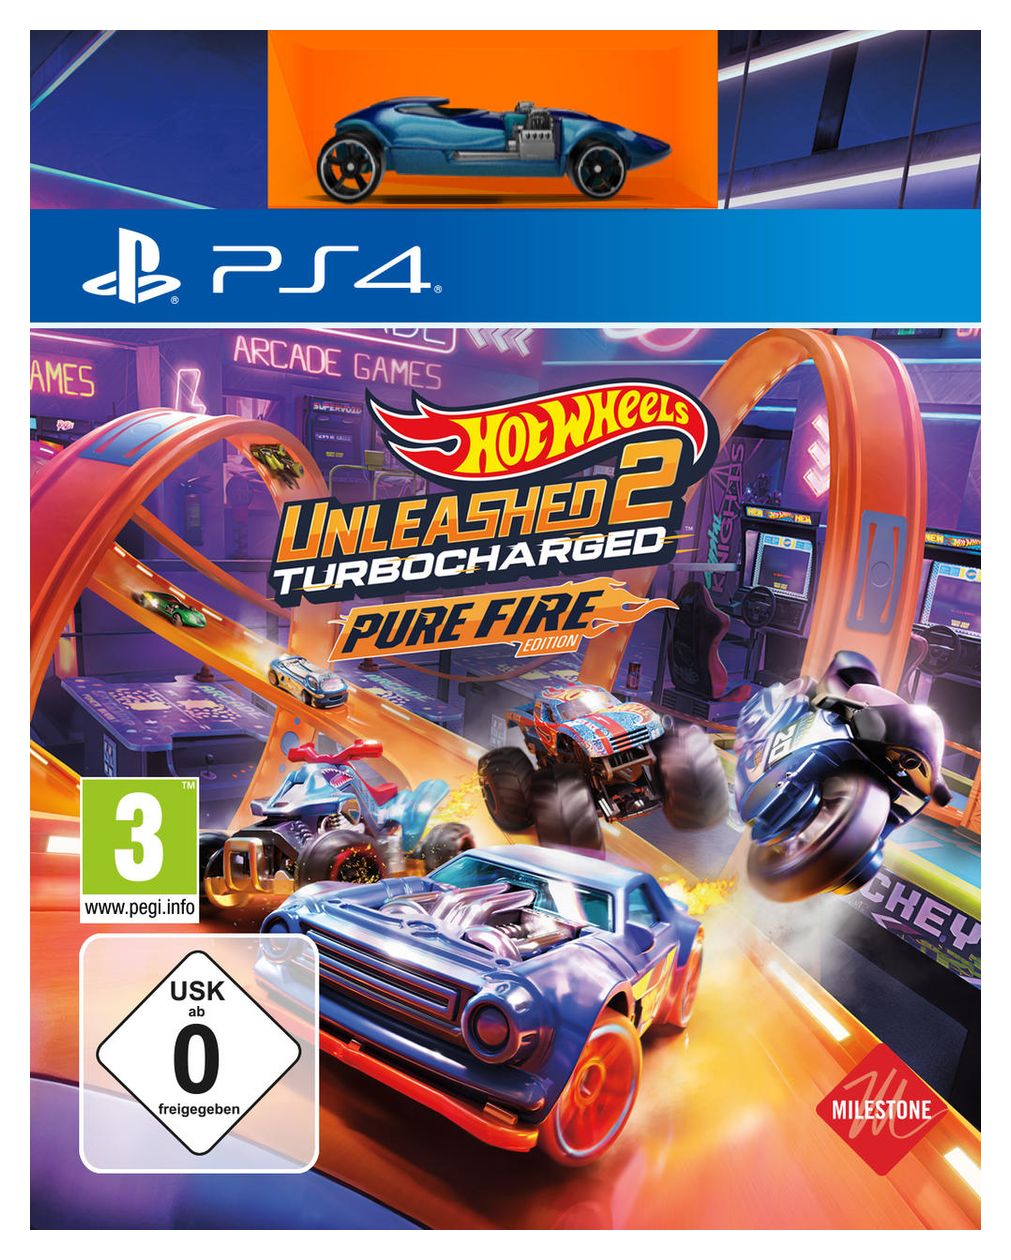 HOT WHEELS UNLEASHED™ 2 - Turbocharged Pure Fire Edition (PlayStation 4) 